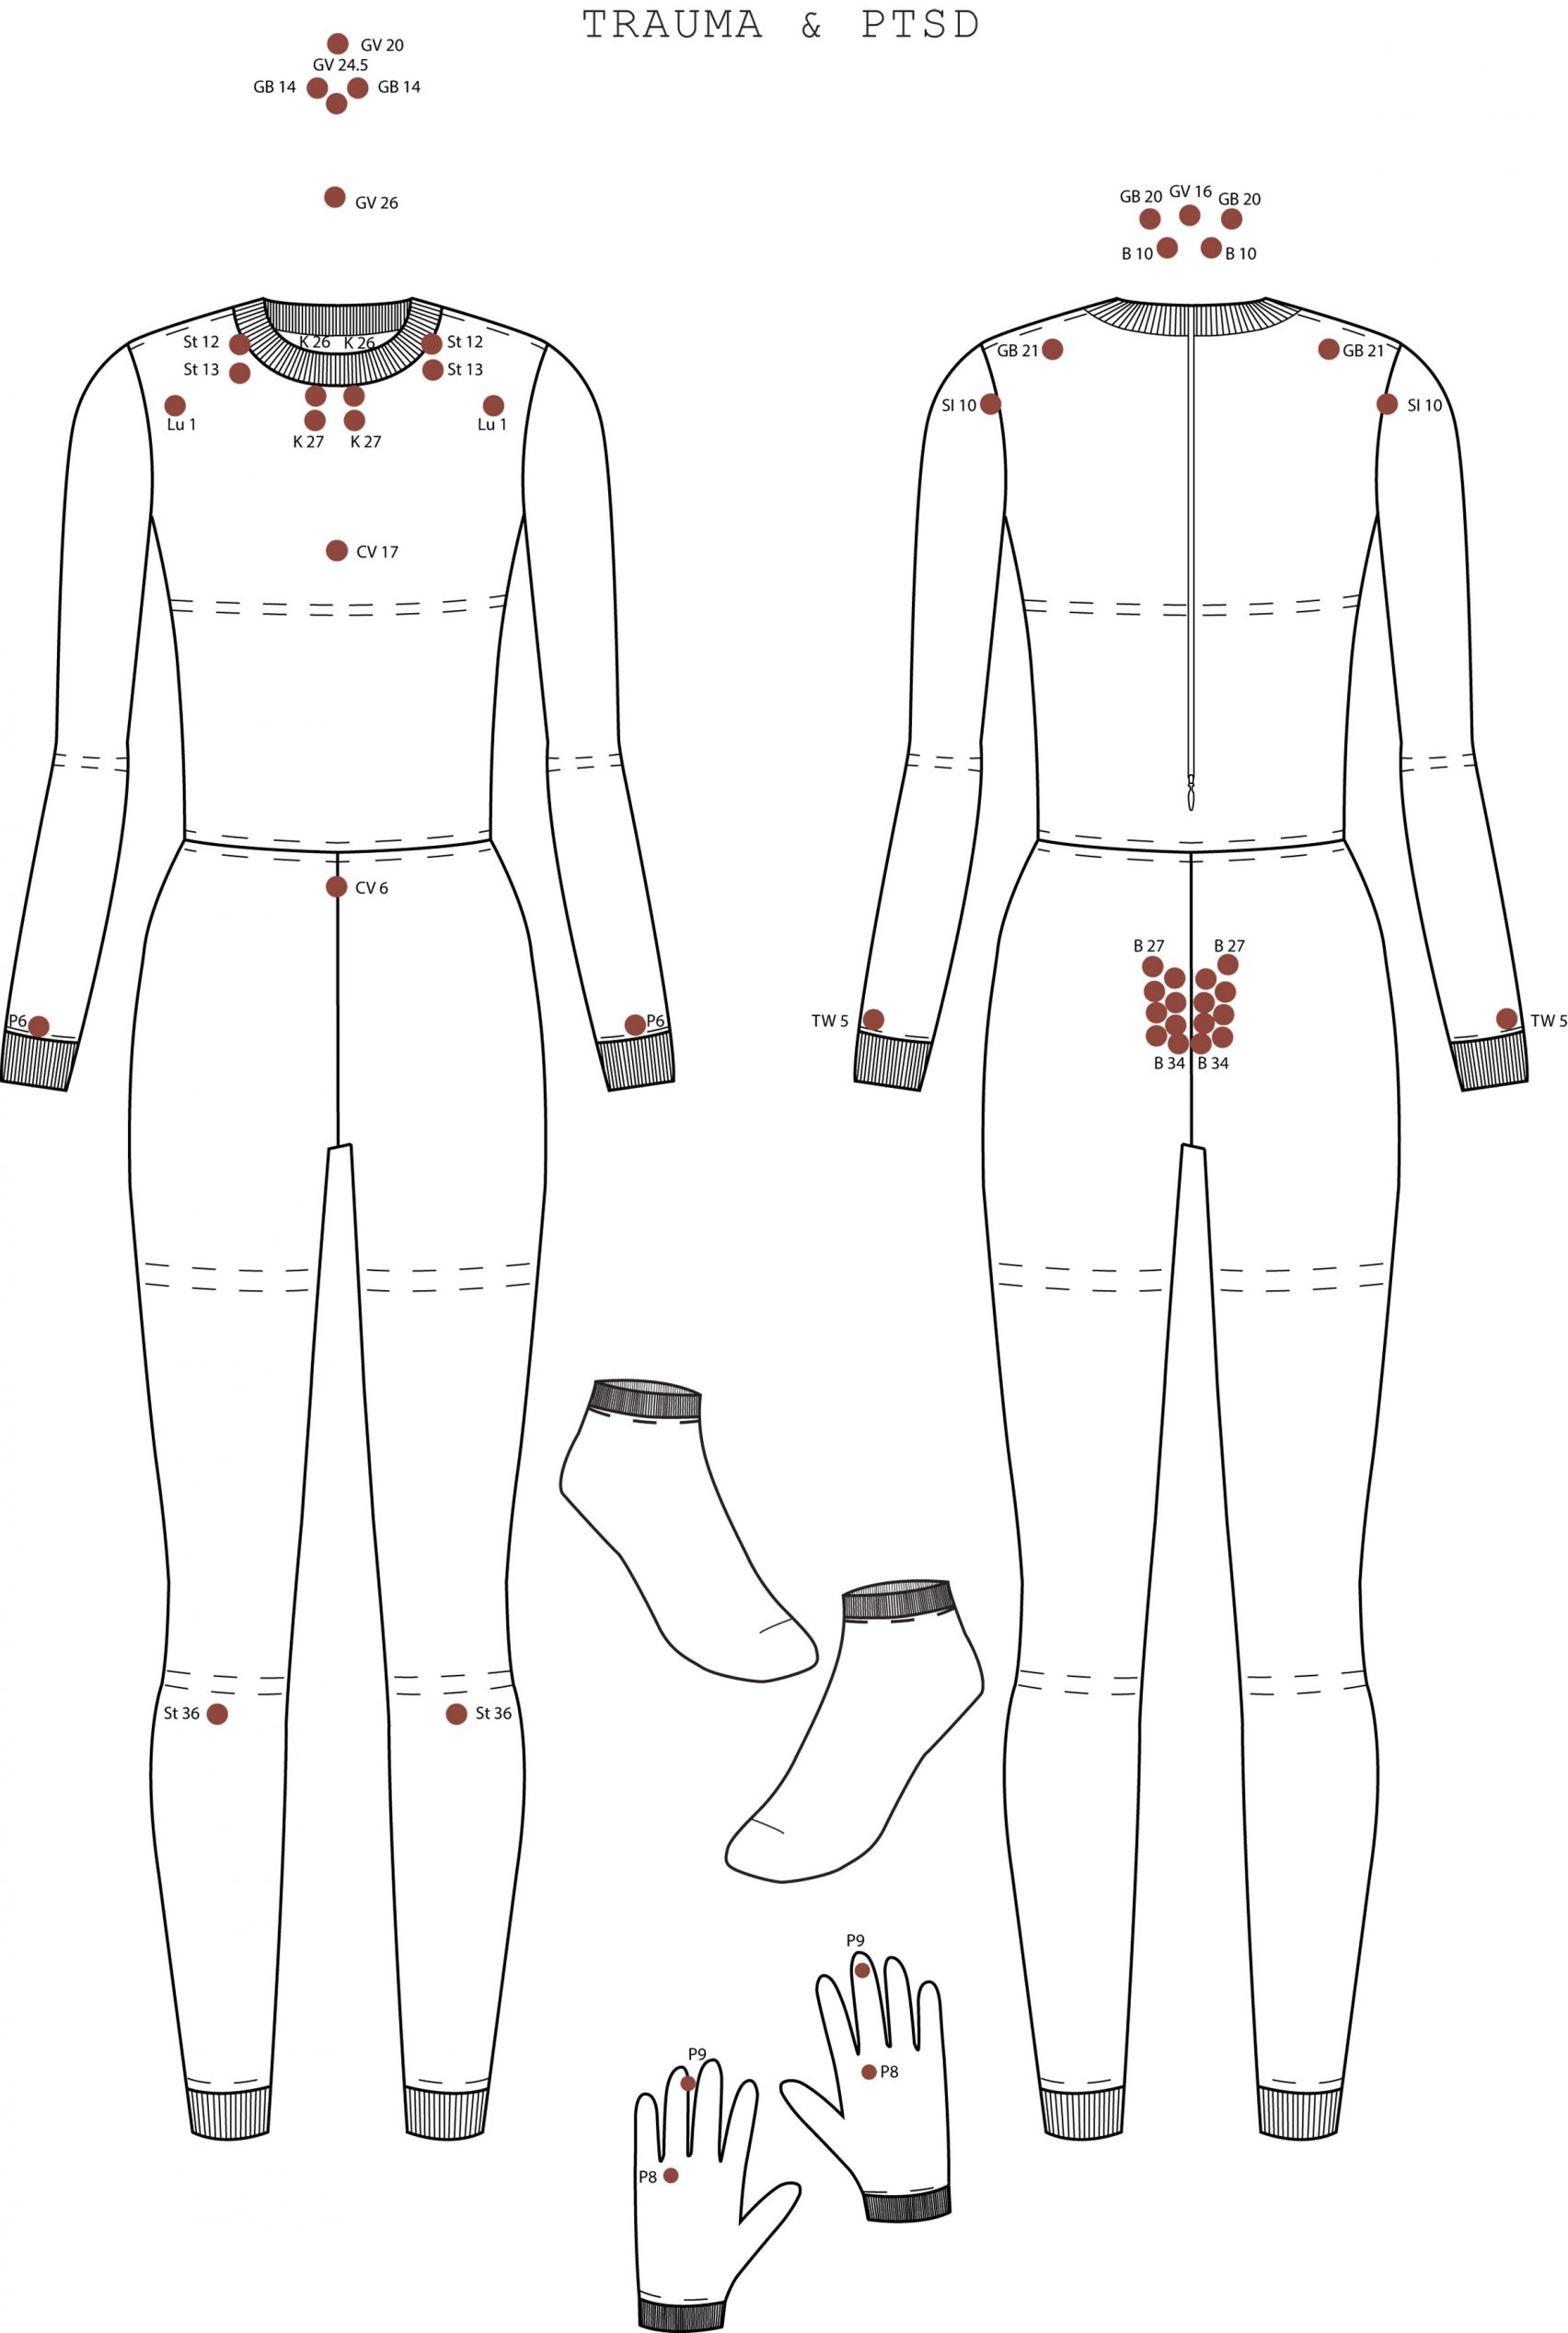 Illustration showing acupressure points around the neck, wrists, knees, chest, stomach and rear